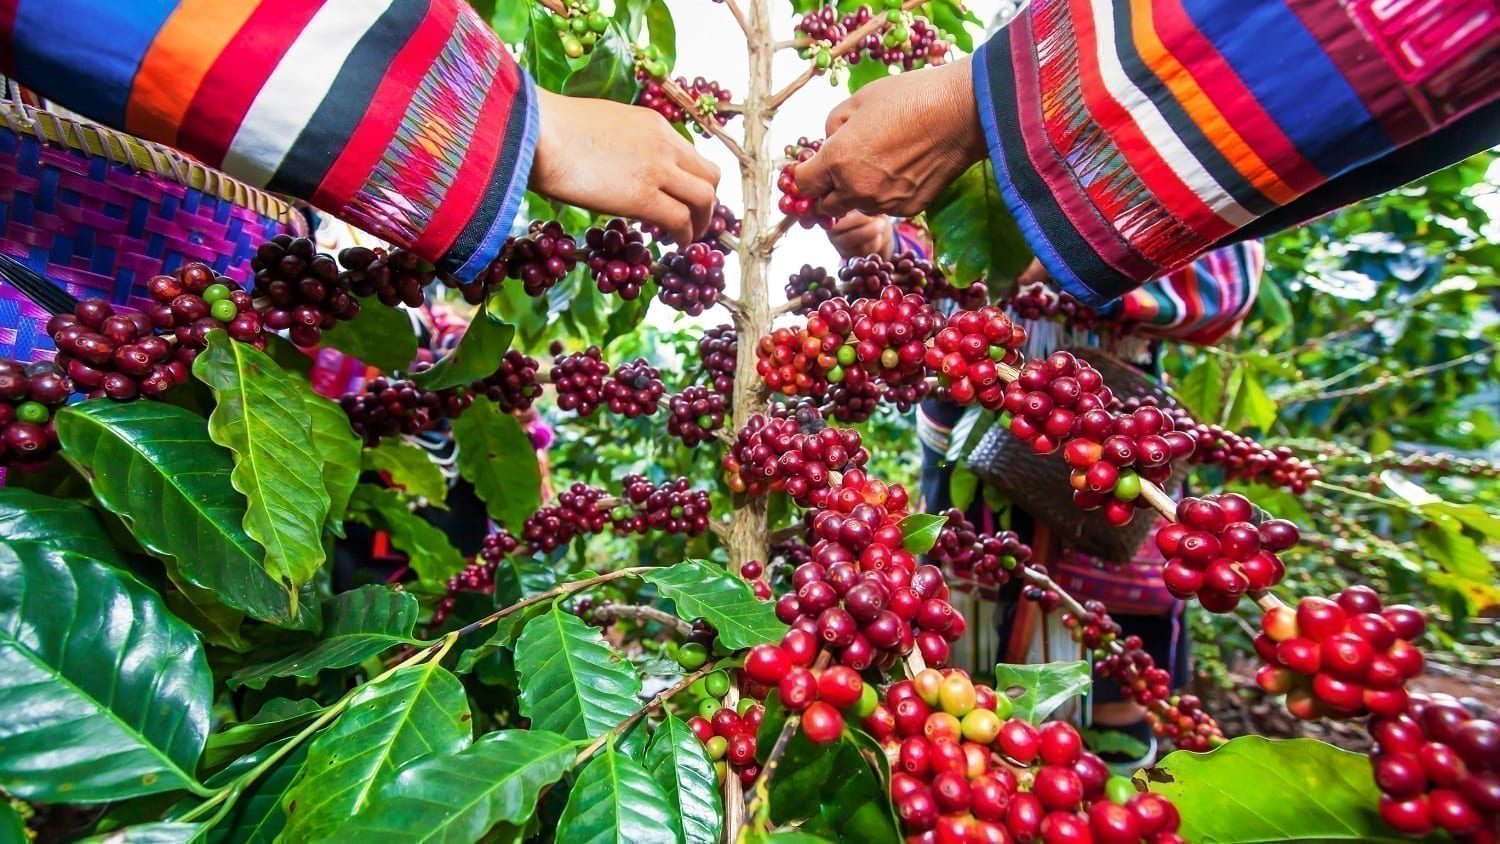 Women in traditional garb gathering coffee berries: photo credit dreamstime 157659021